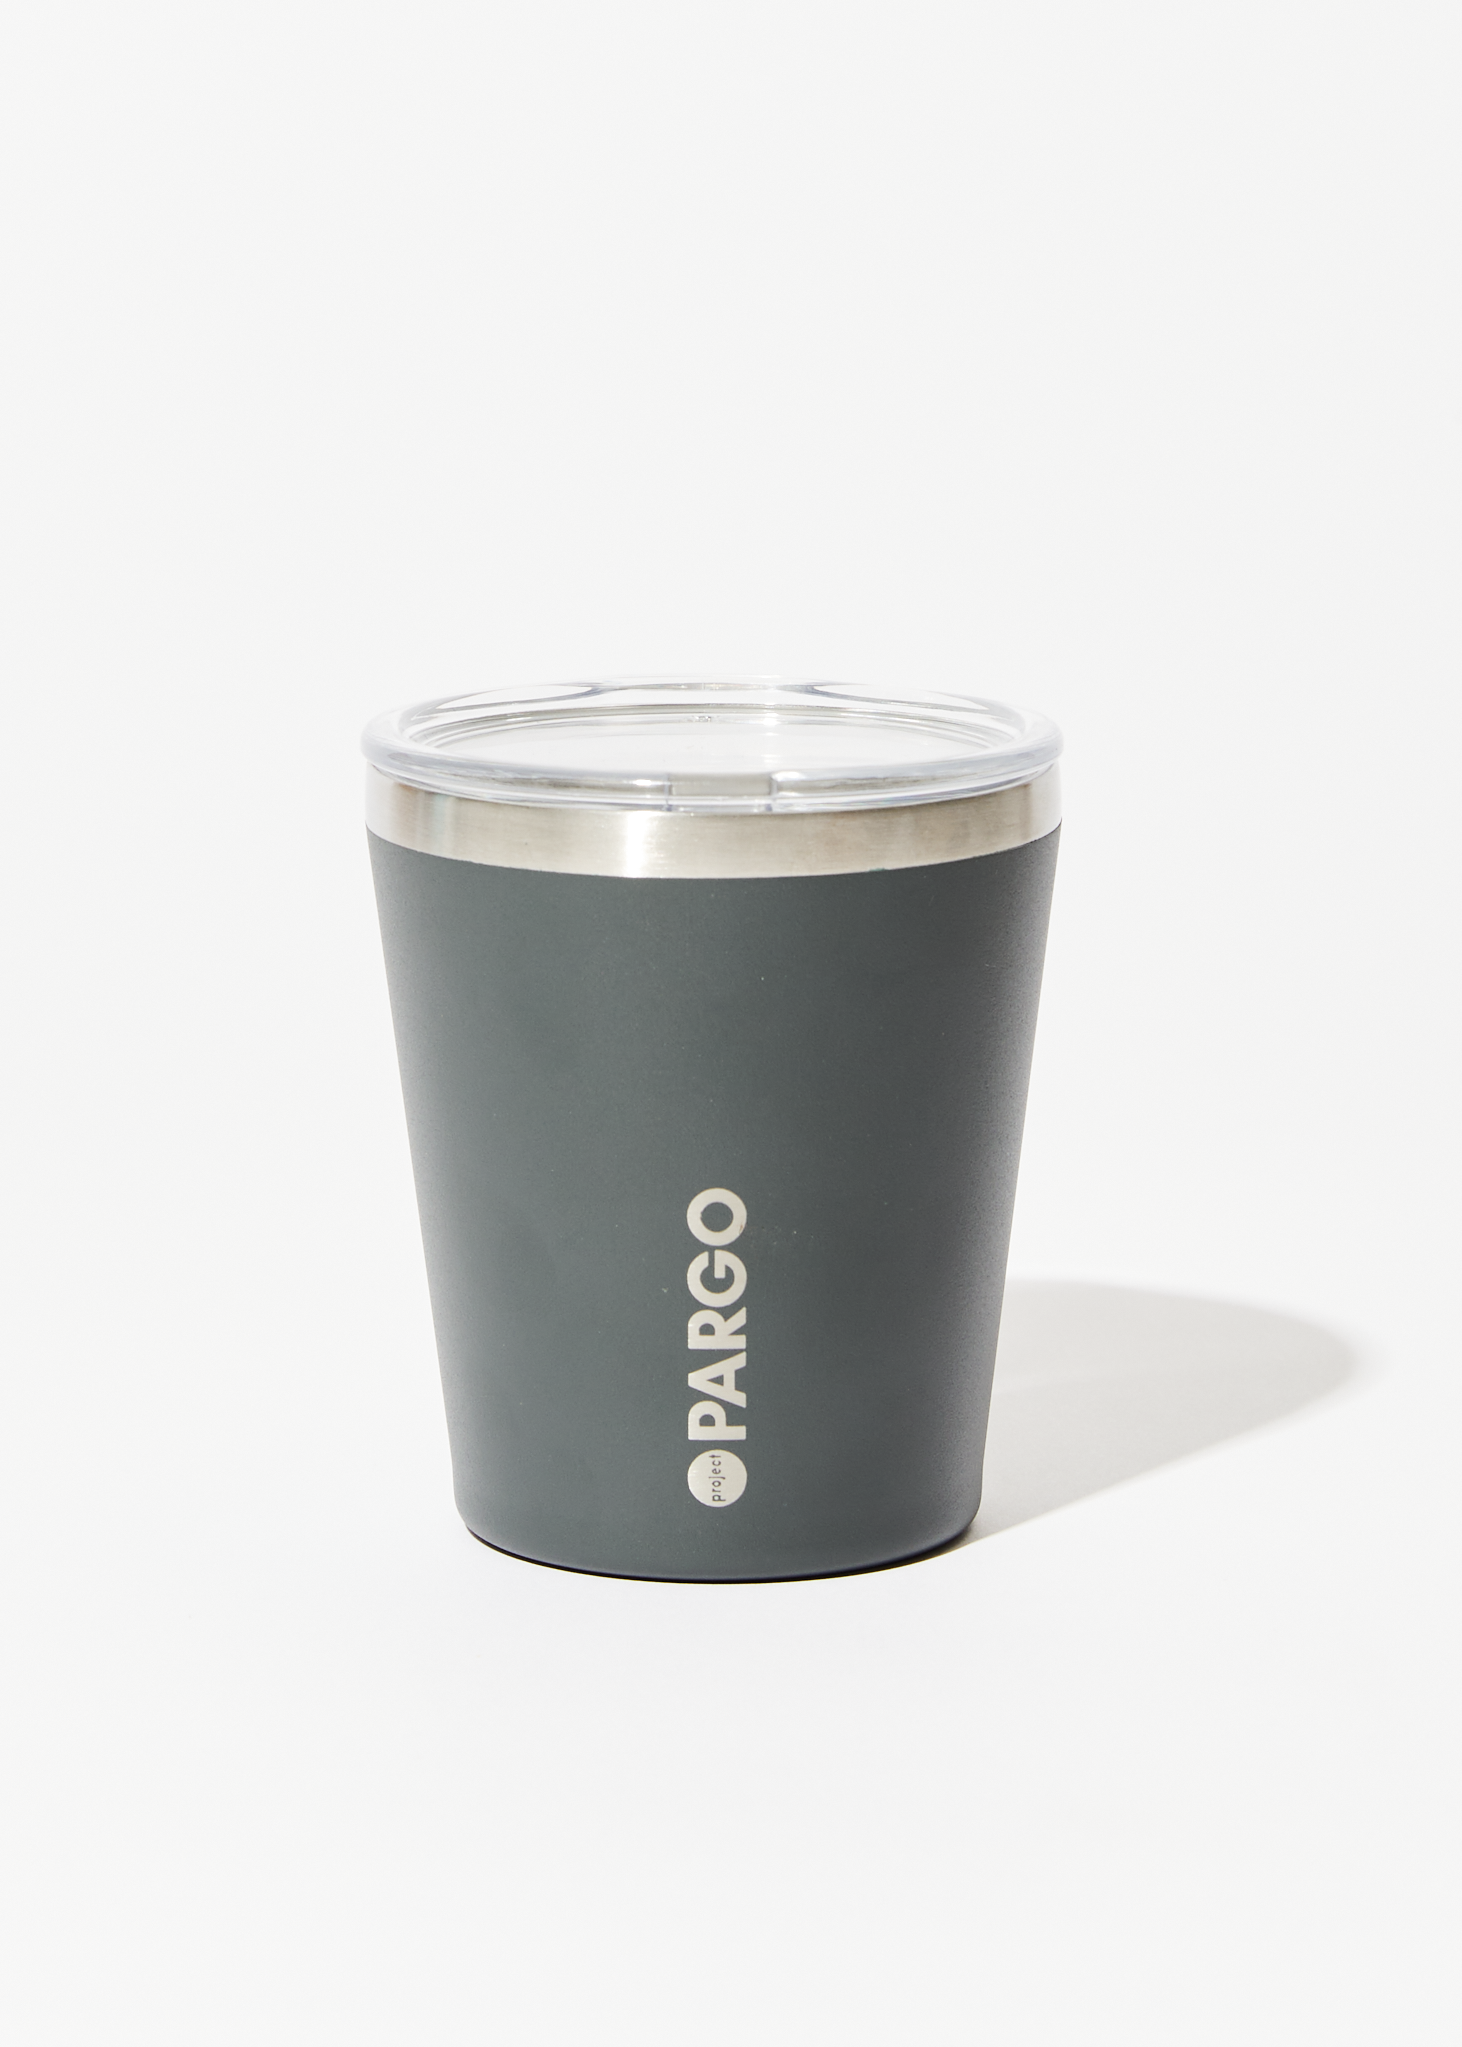 Afends Unisex Pargo x Afends - 8oz Insulated Coffee Cup - BBQ Charcoal 